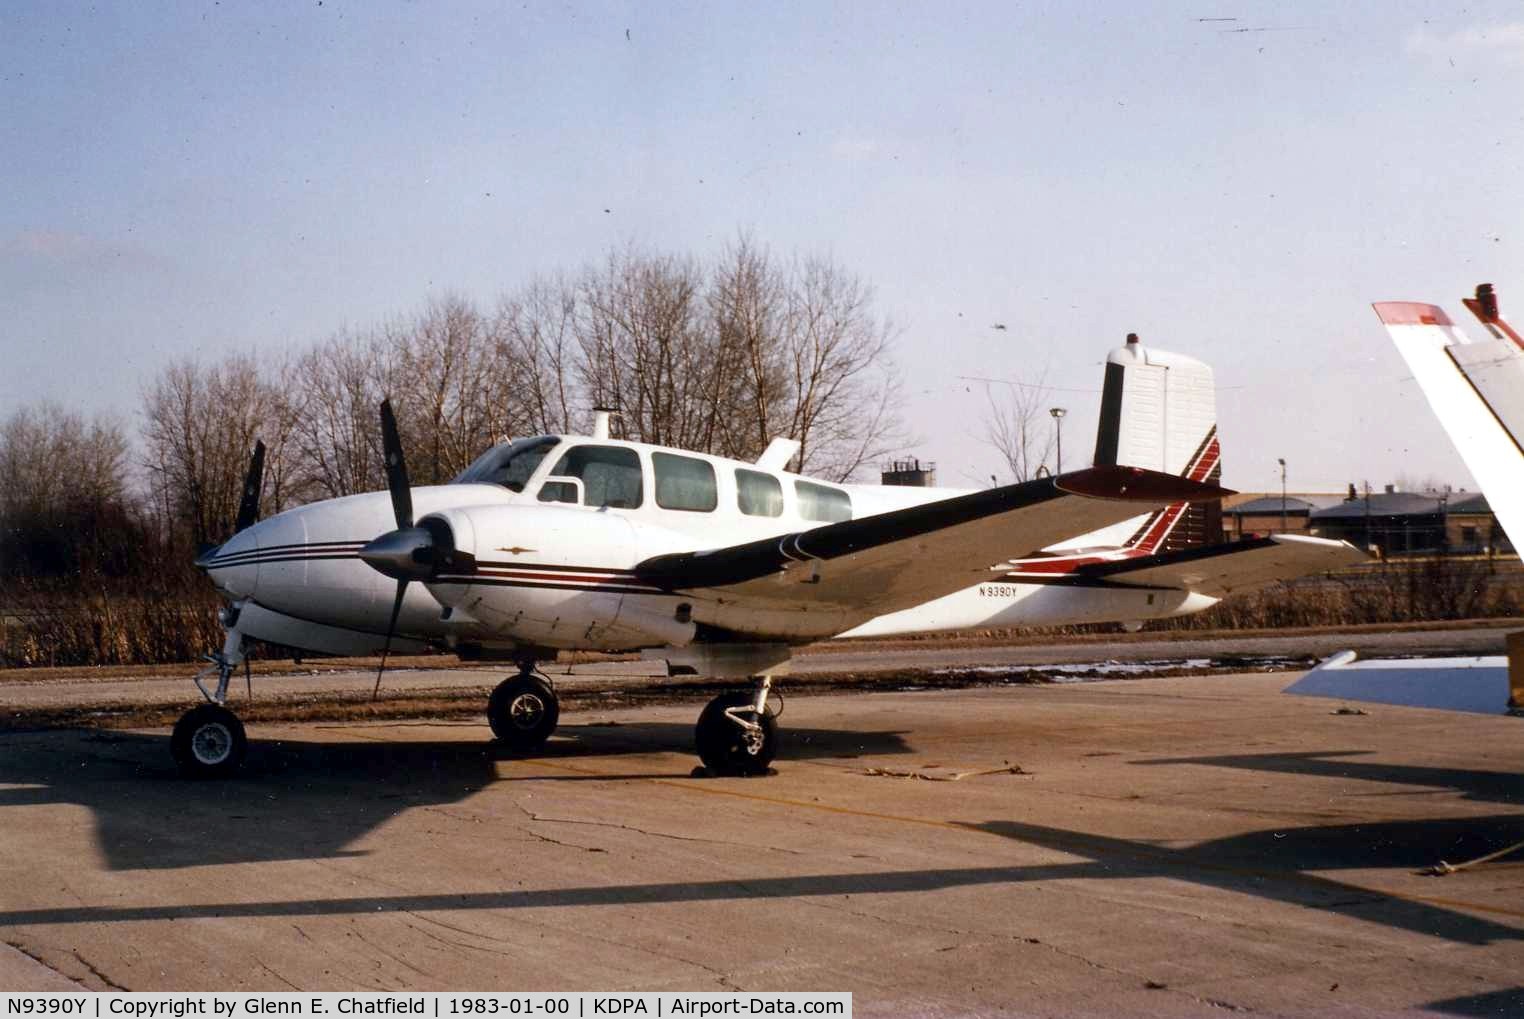 N9390Y, 1961 Beech J50 C/N JH-151, Photo taken for aircraft recognition training